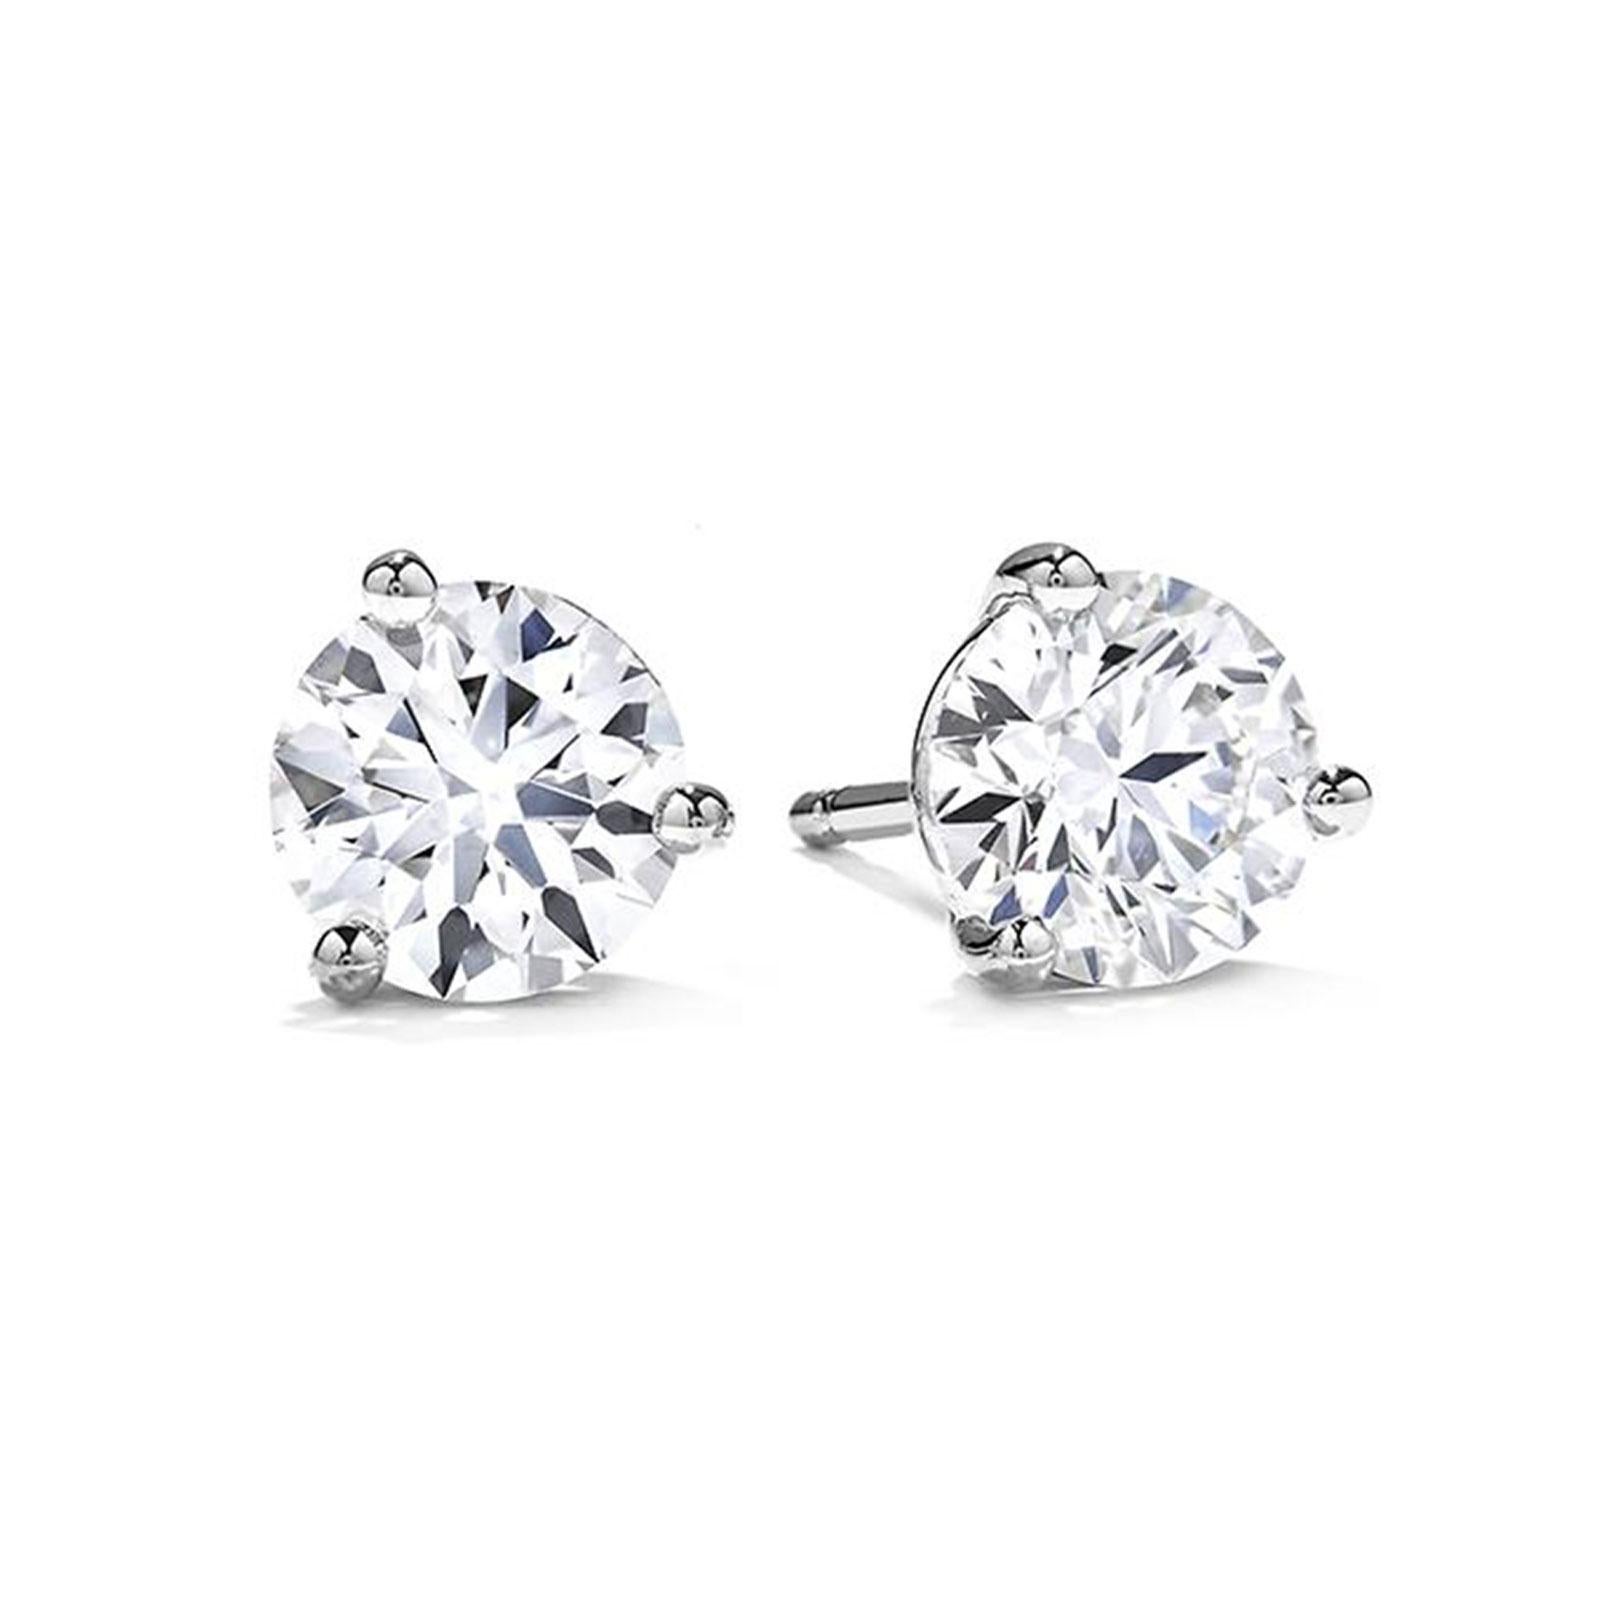 Round Cut 2.01 CTW Diamond Stud Earrings GIA E/SI1 Triple Excellent White Gold Martini For Sale